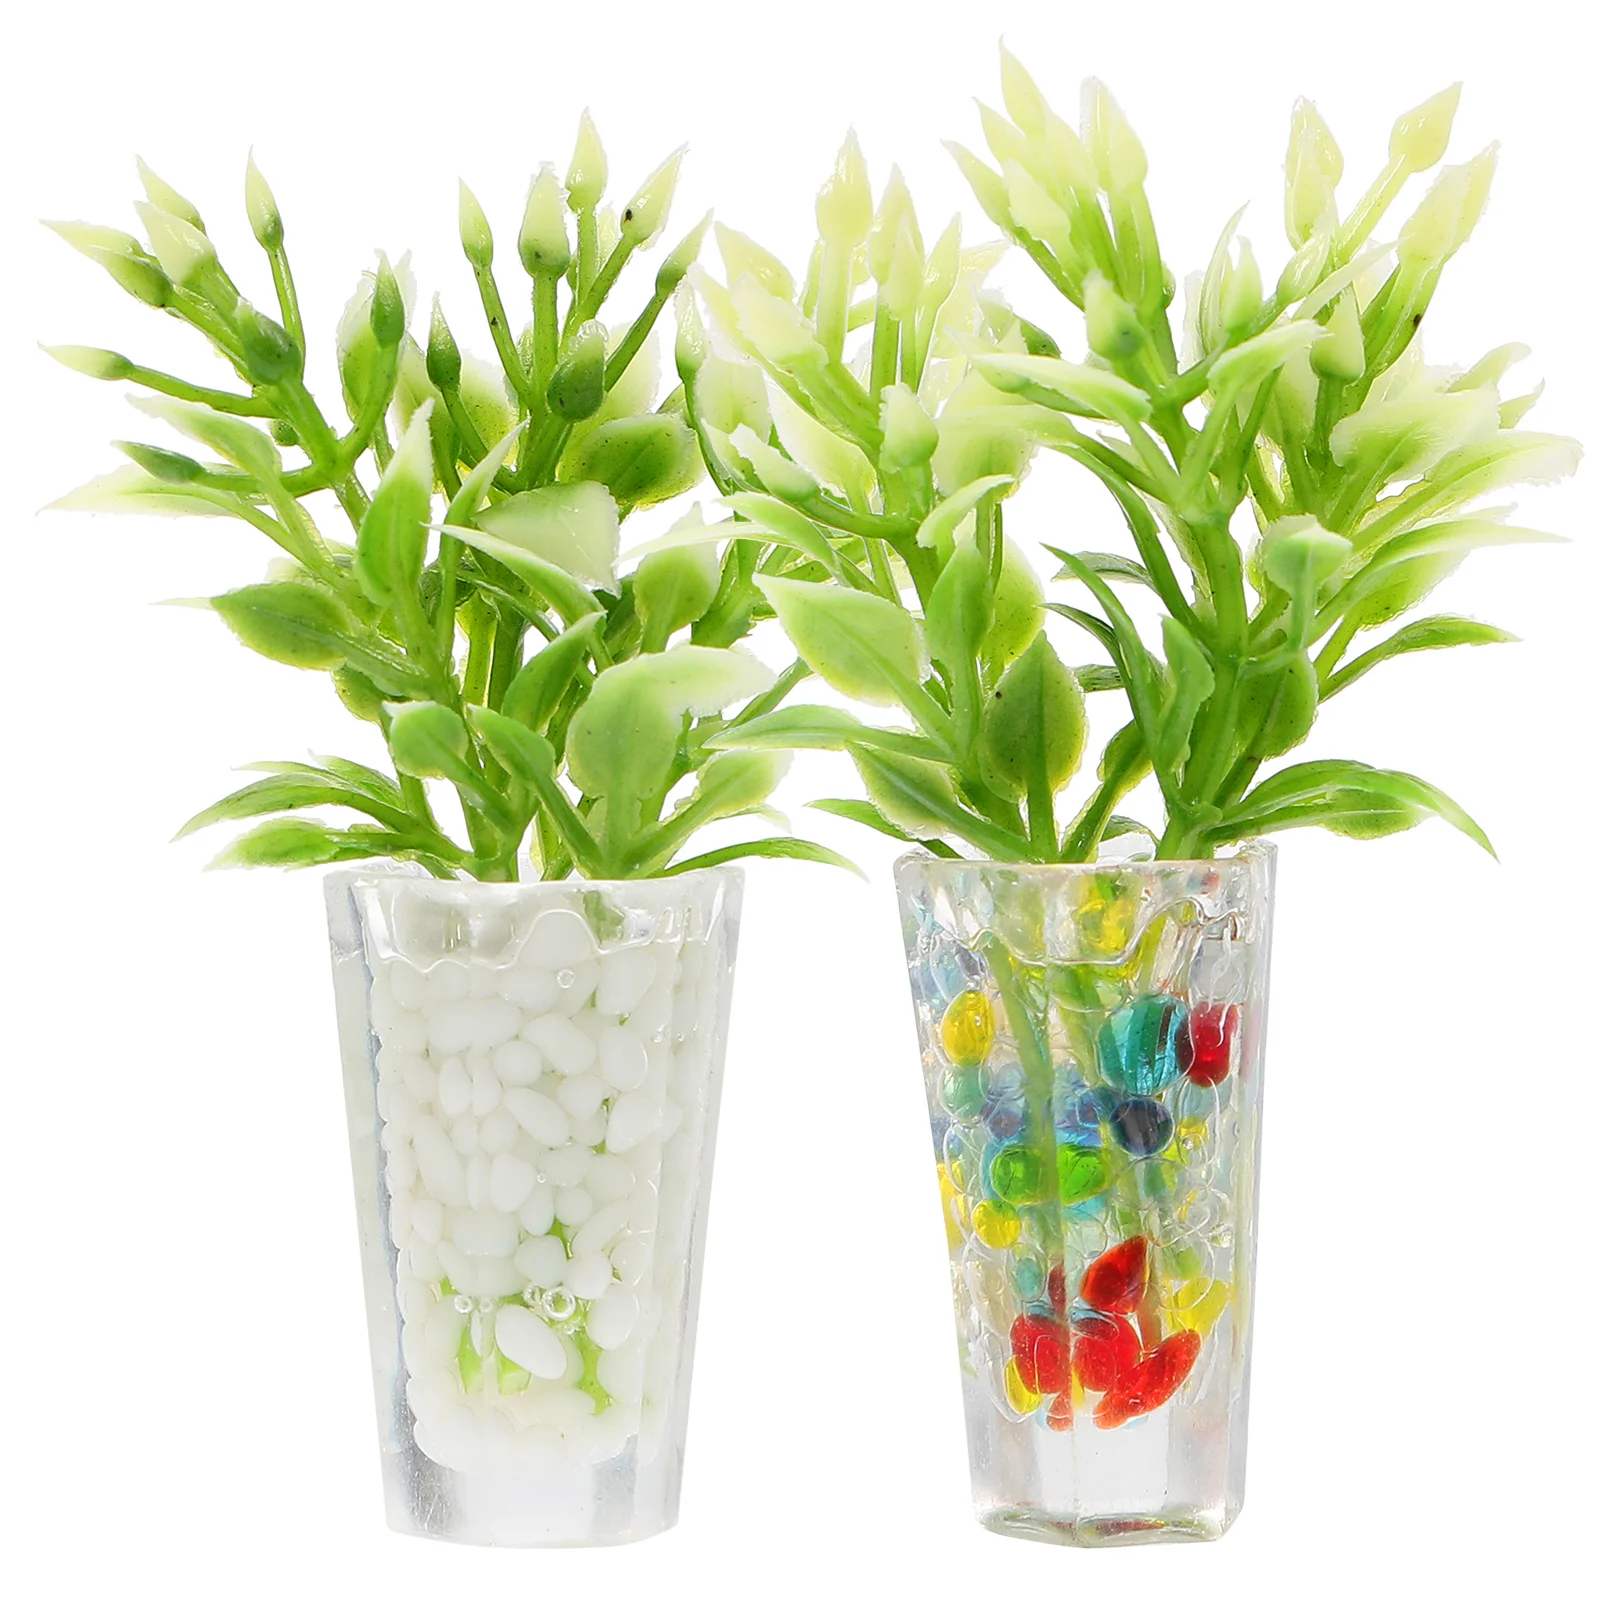 

2 Pcs Tiny Plants Things Artificial Indoor Kitchen Table Centerpieces Decor Decorations Miniature Green Party Favors House